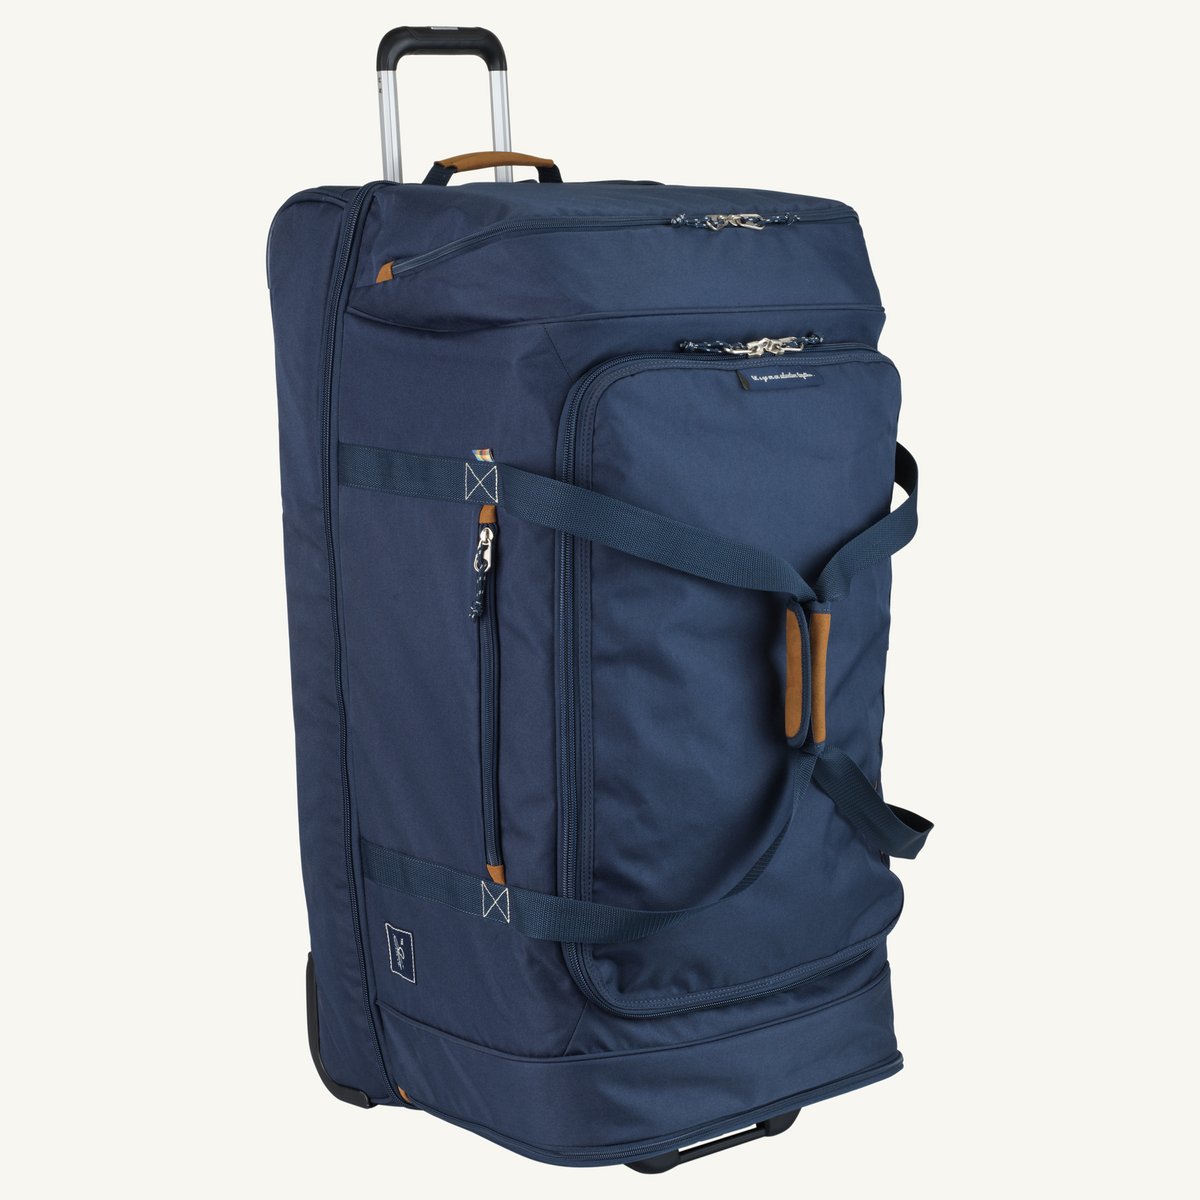 Skyway Luggage Coupeville Extra Large Rolling Duffel Bag - Midnight Blue - Irvâs Luggage